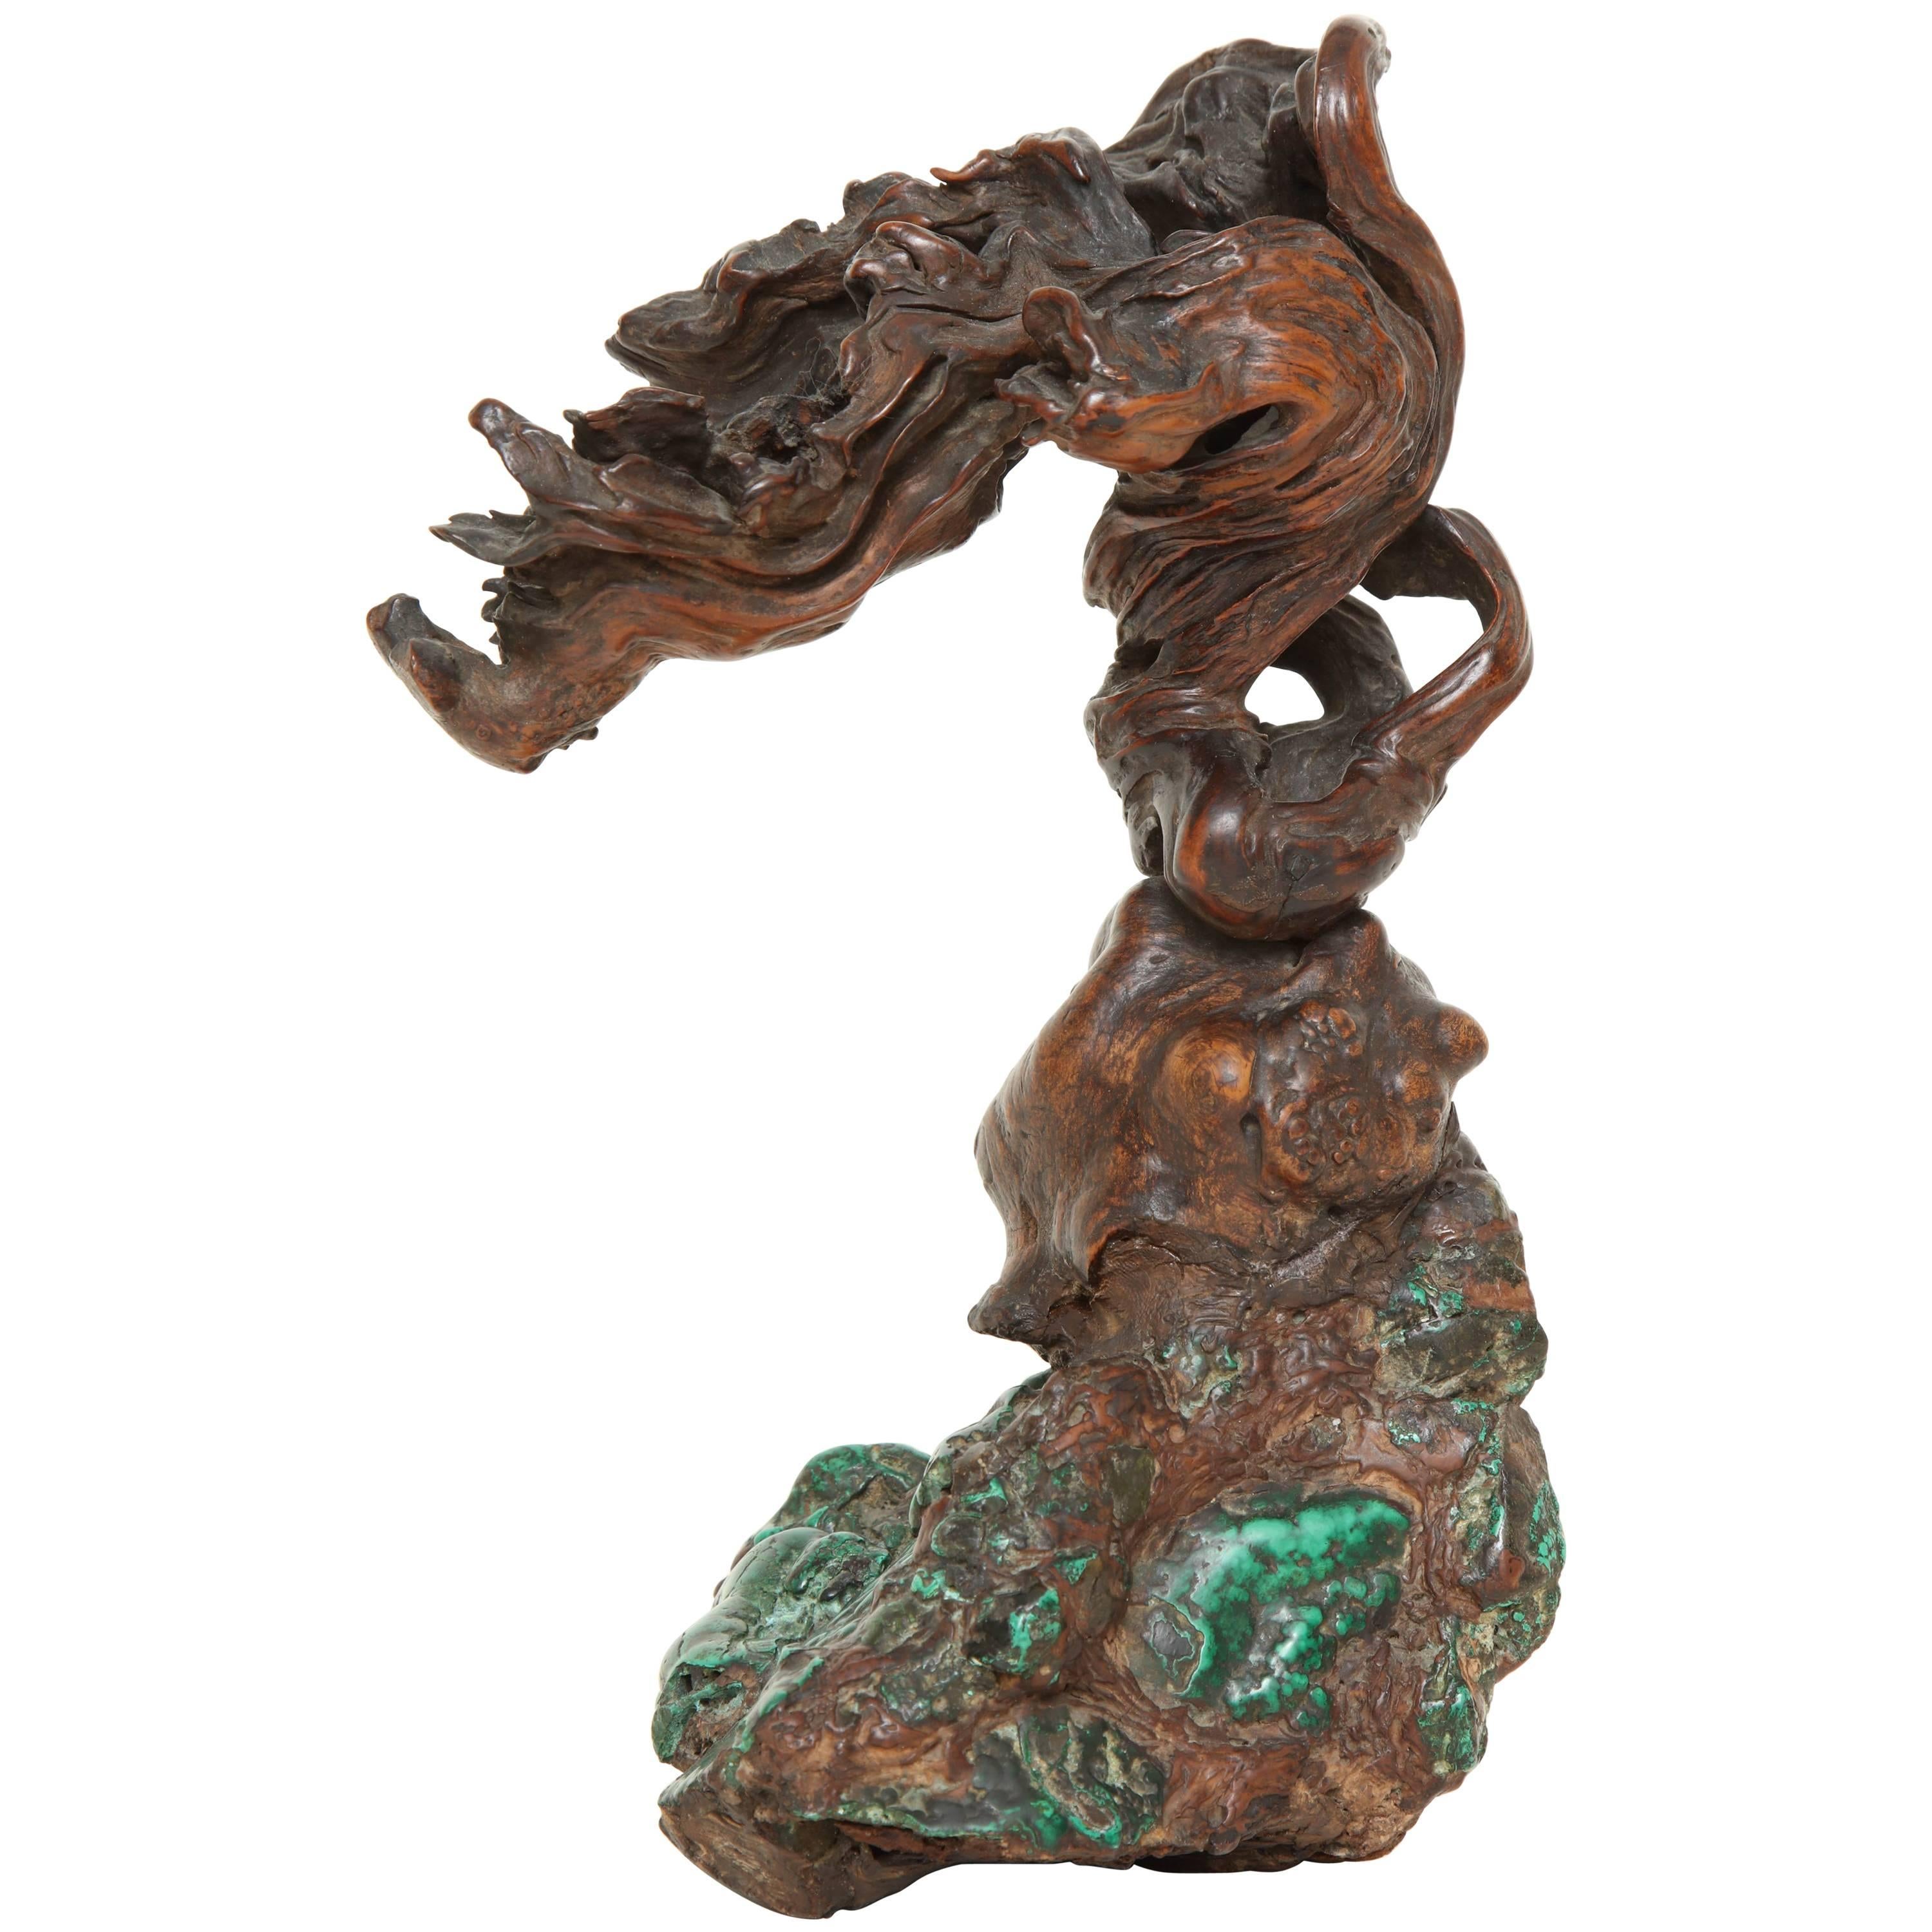 19th Century Chinese Malachite and Rootwood Scholar's Object